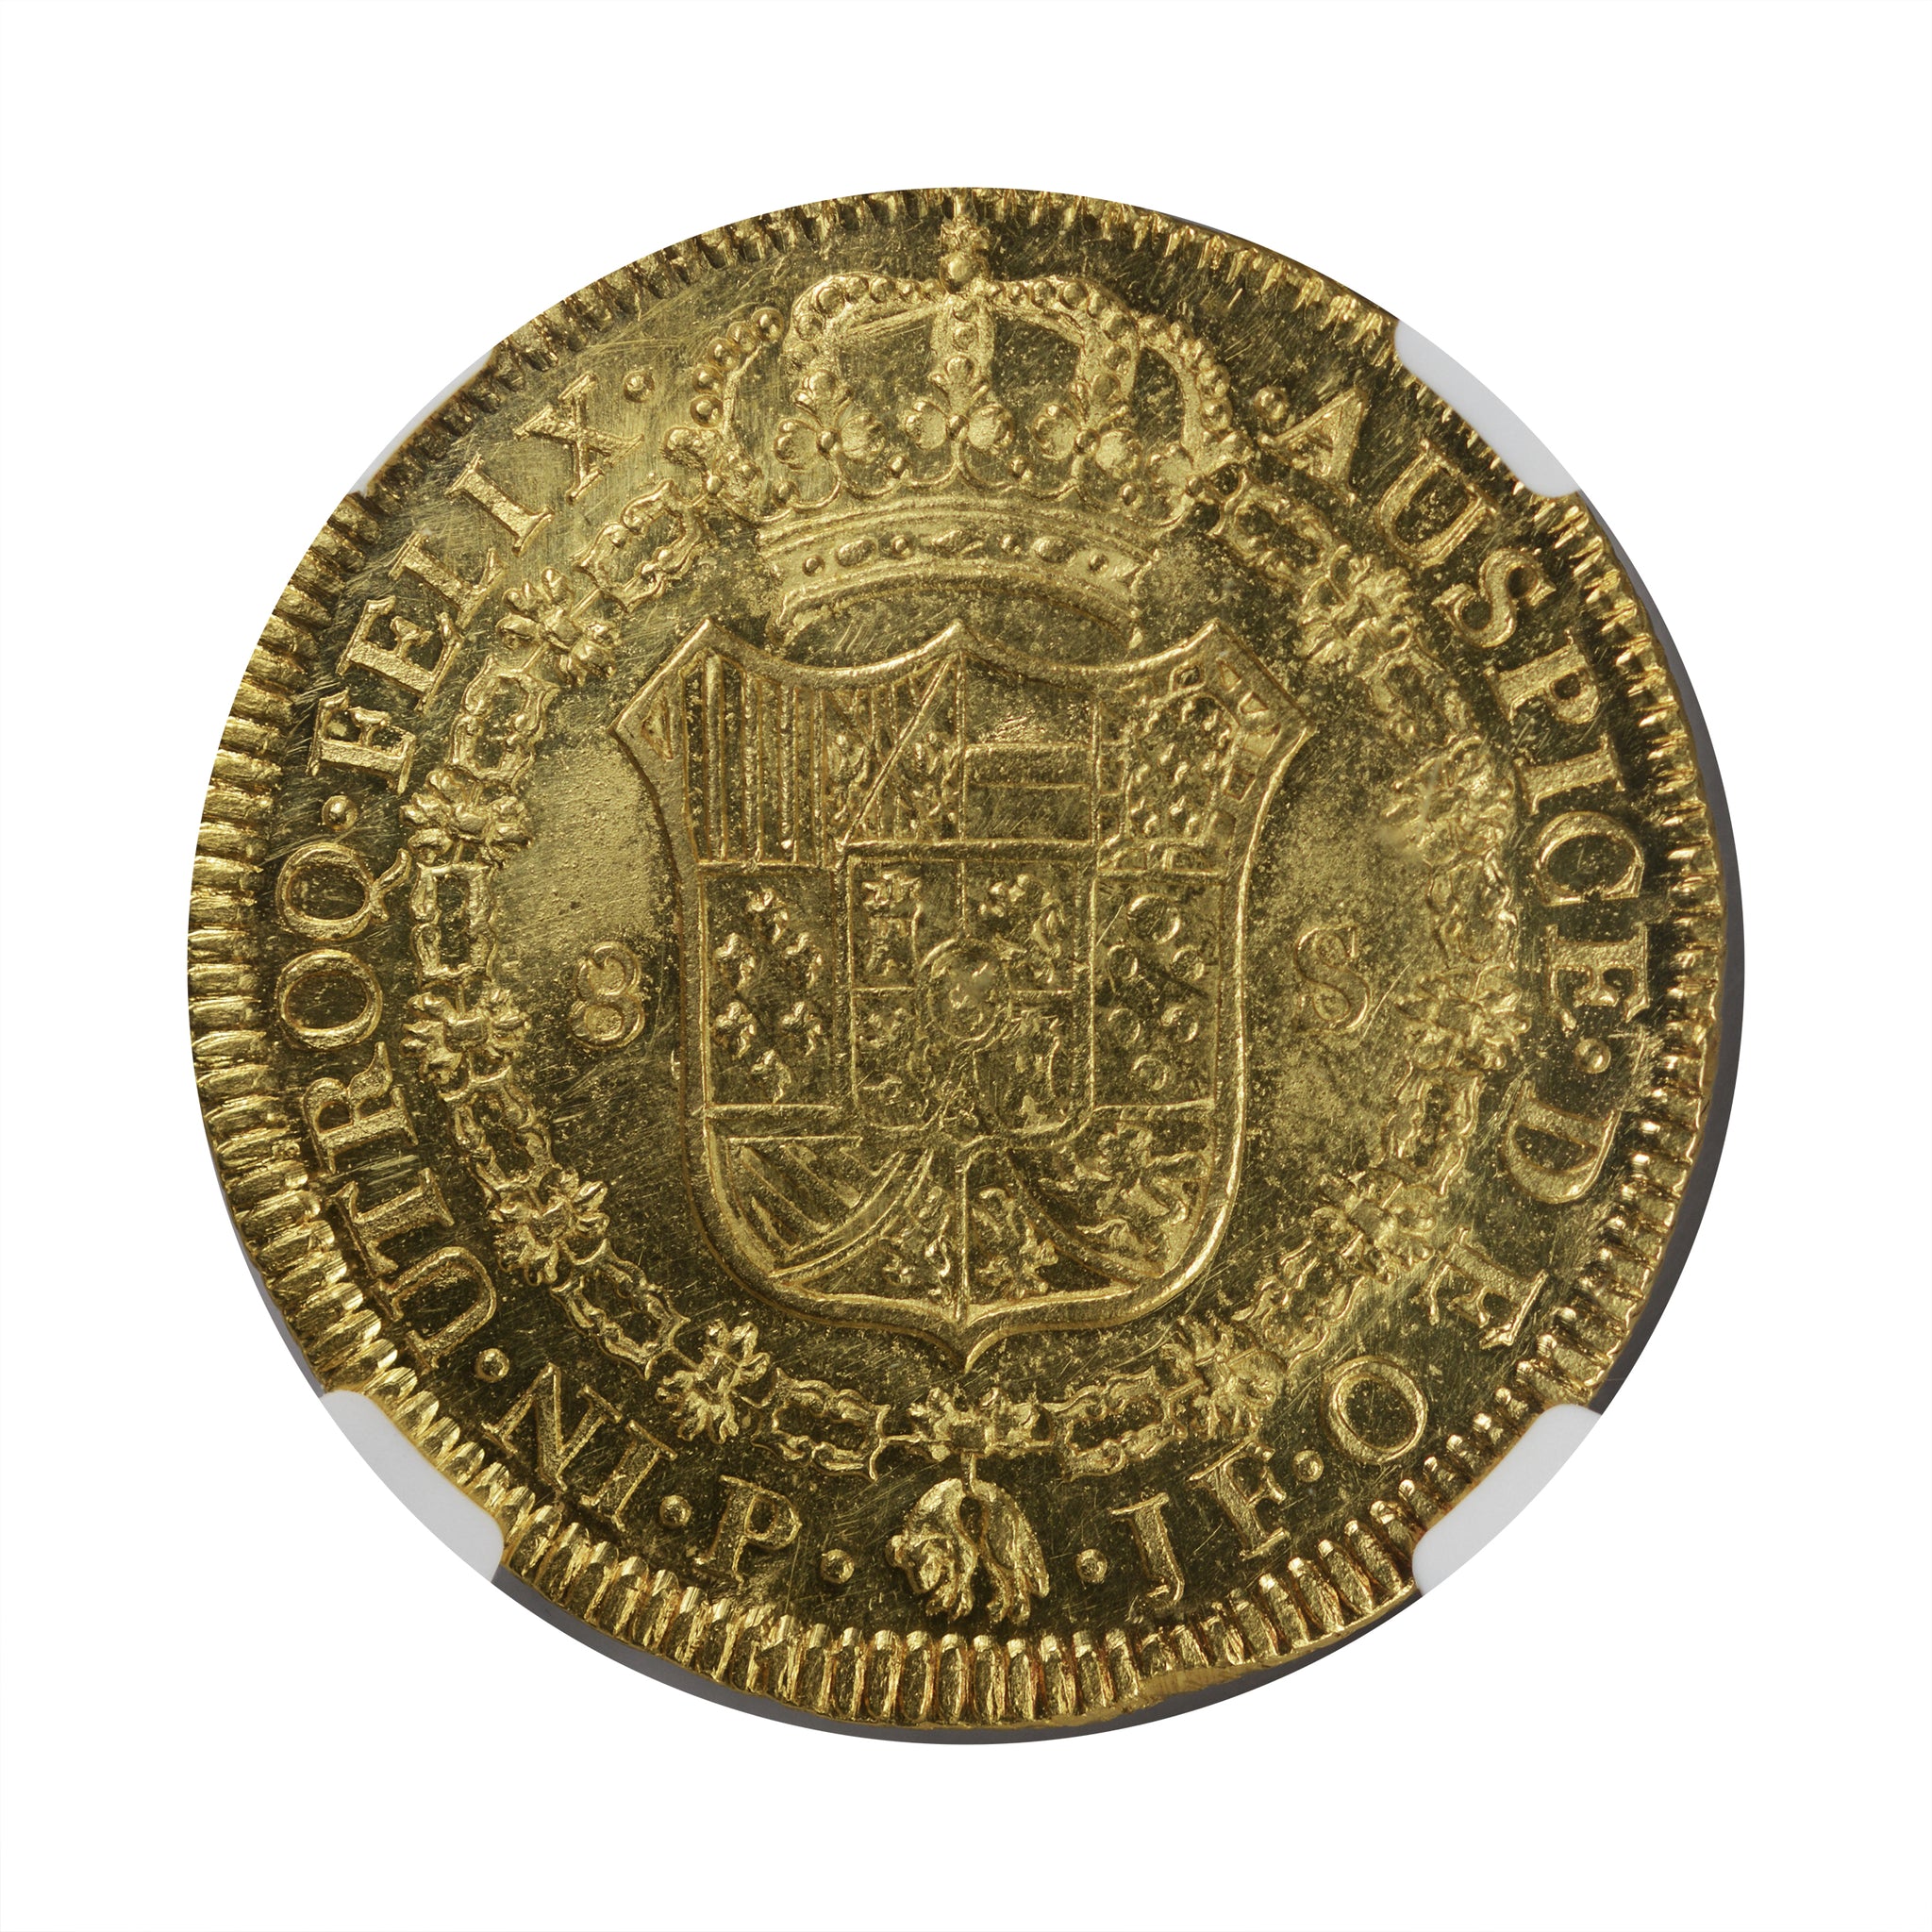 Colombia - Gold 8 Escudos 1807-P JF MS-61 NGC - Coin – Powell Coins